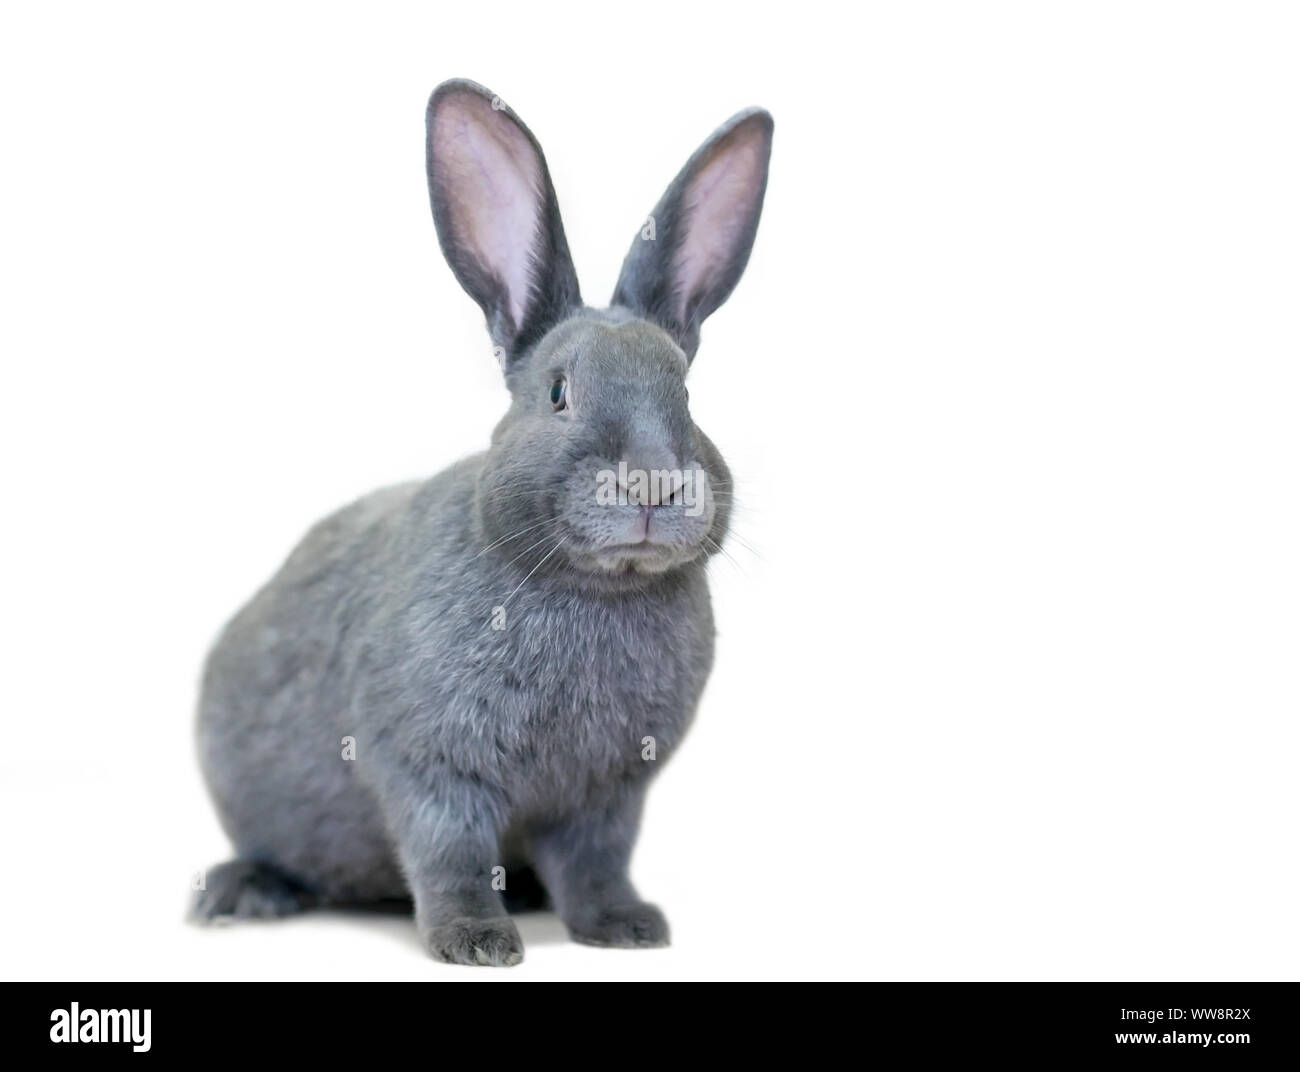 A gray American rabbit with large ears Stock Photo